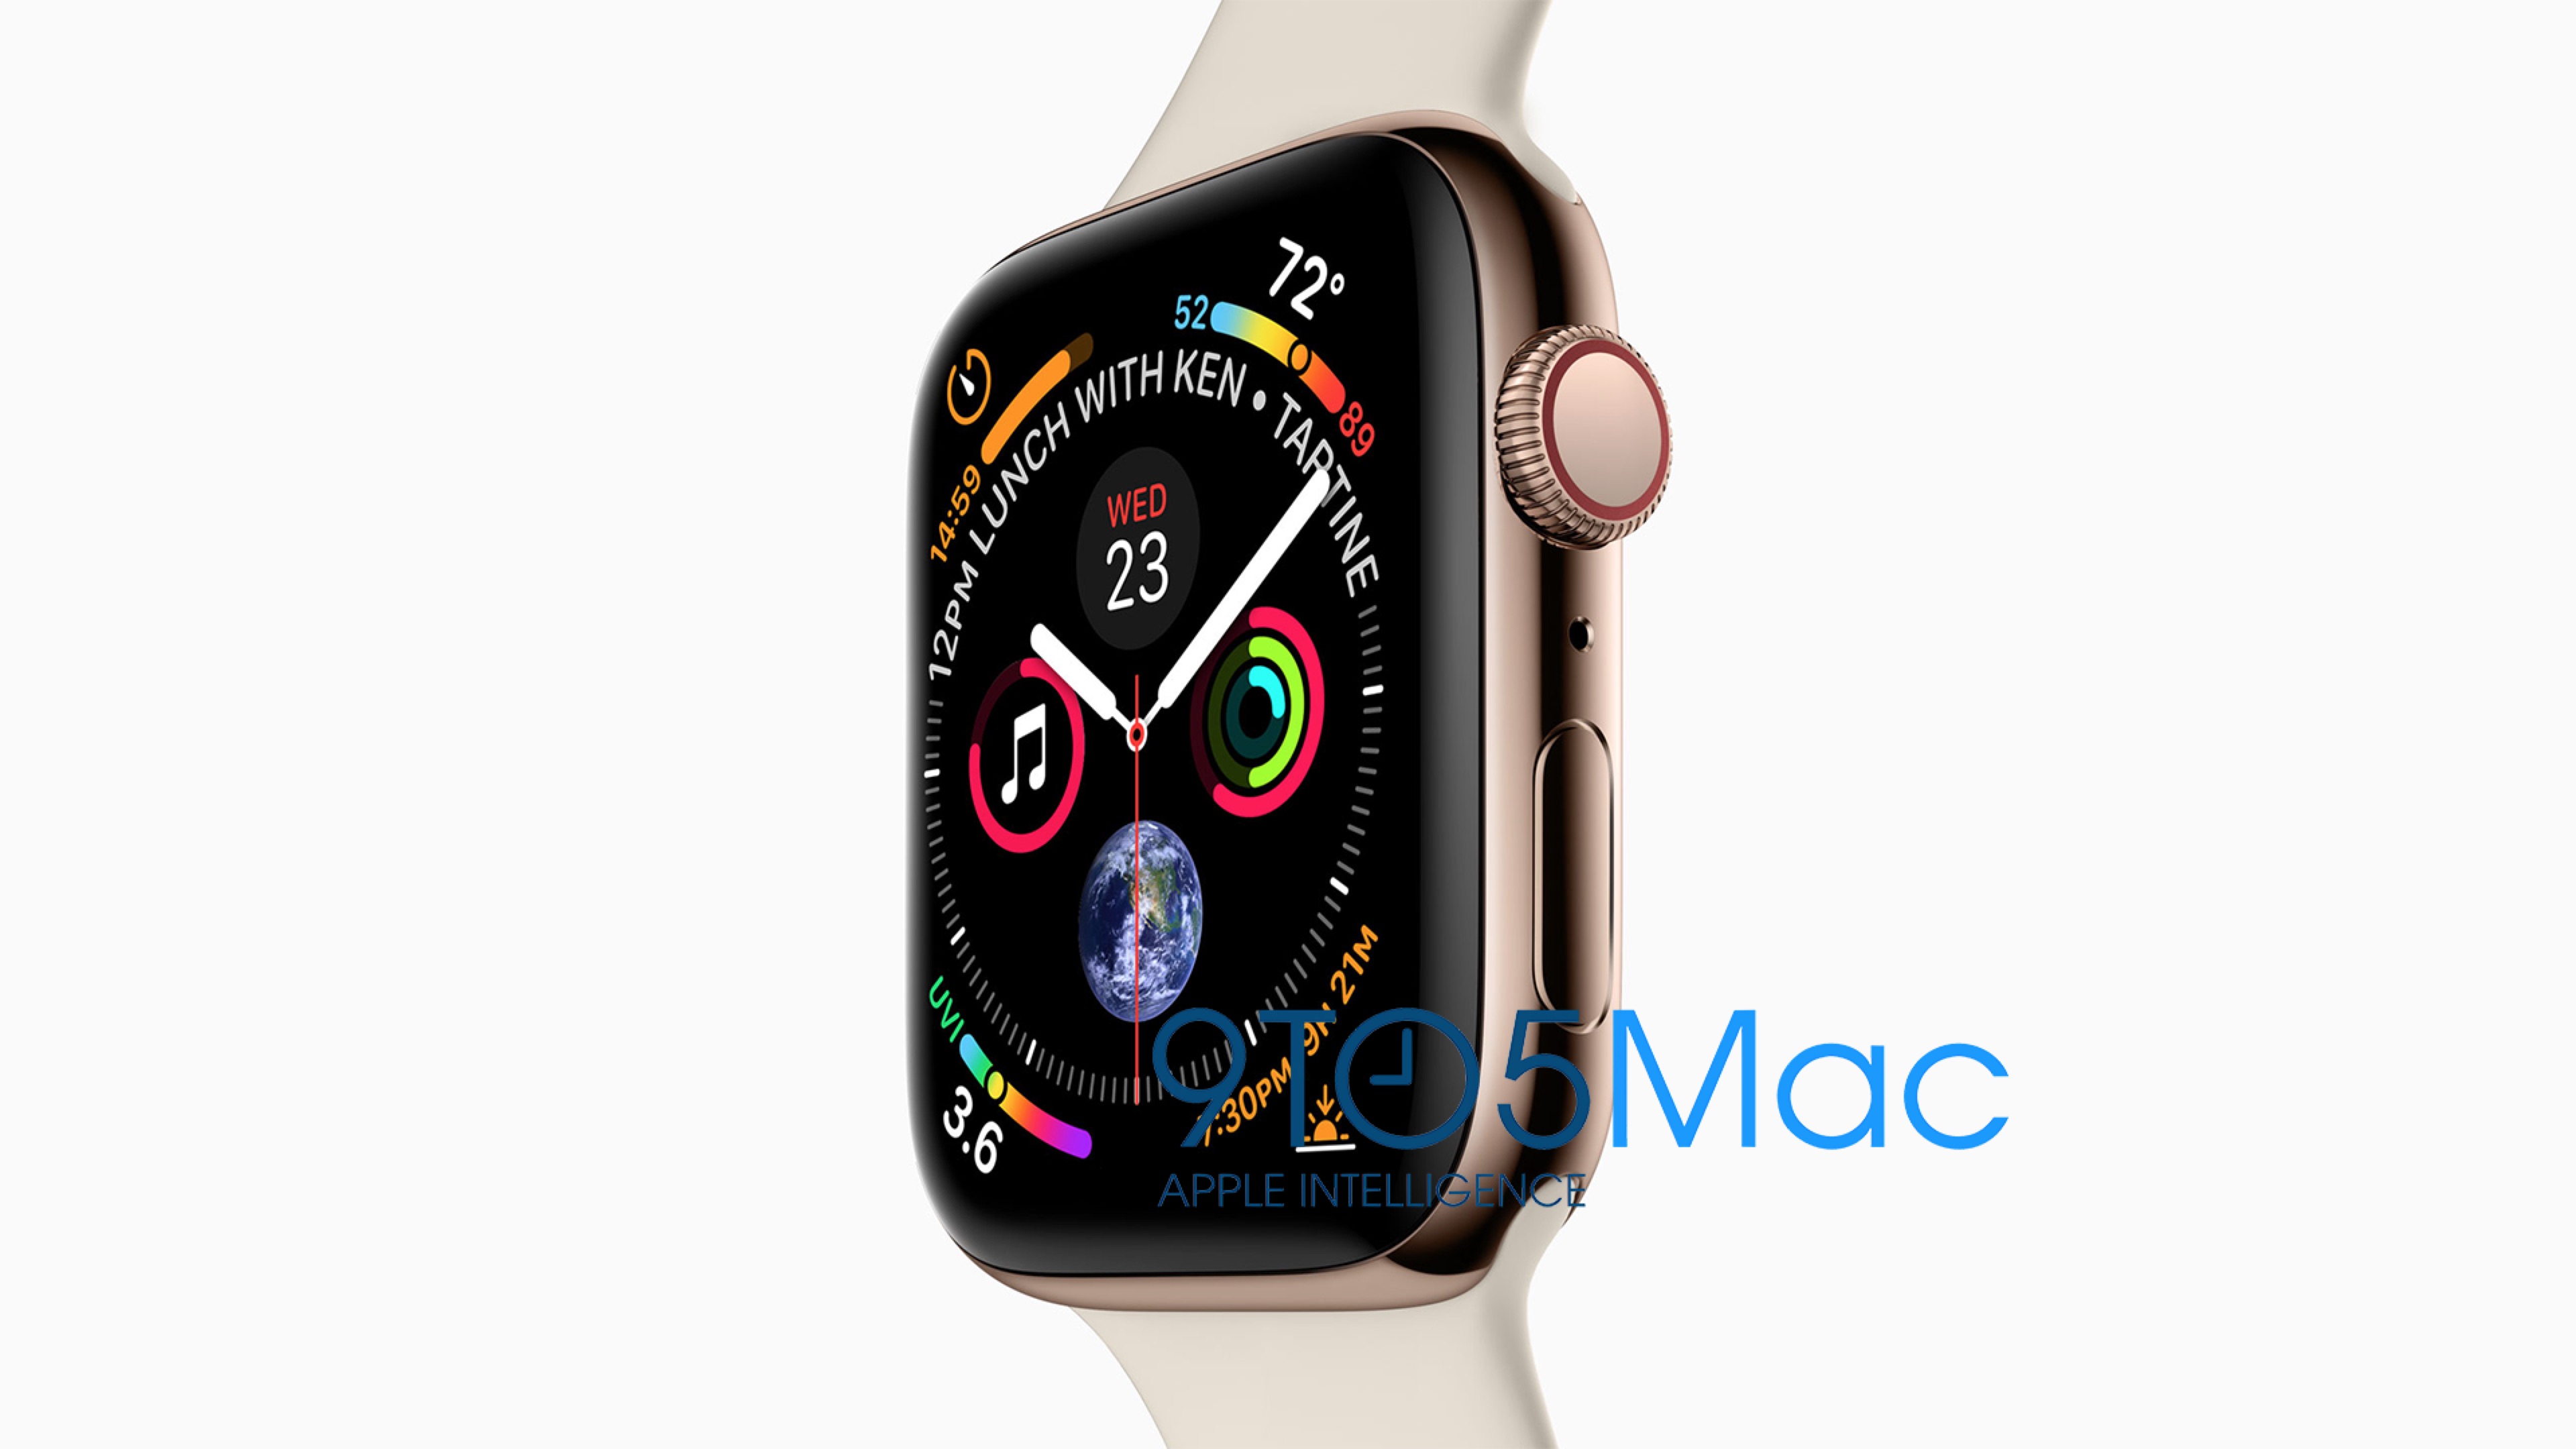 Apple sitemap leak reveals new 40mm and 44mm Apple Watch Series 4